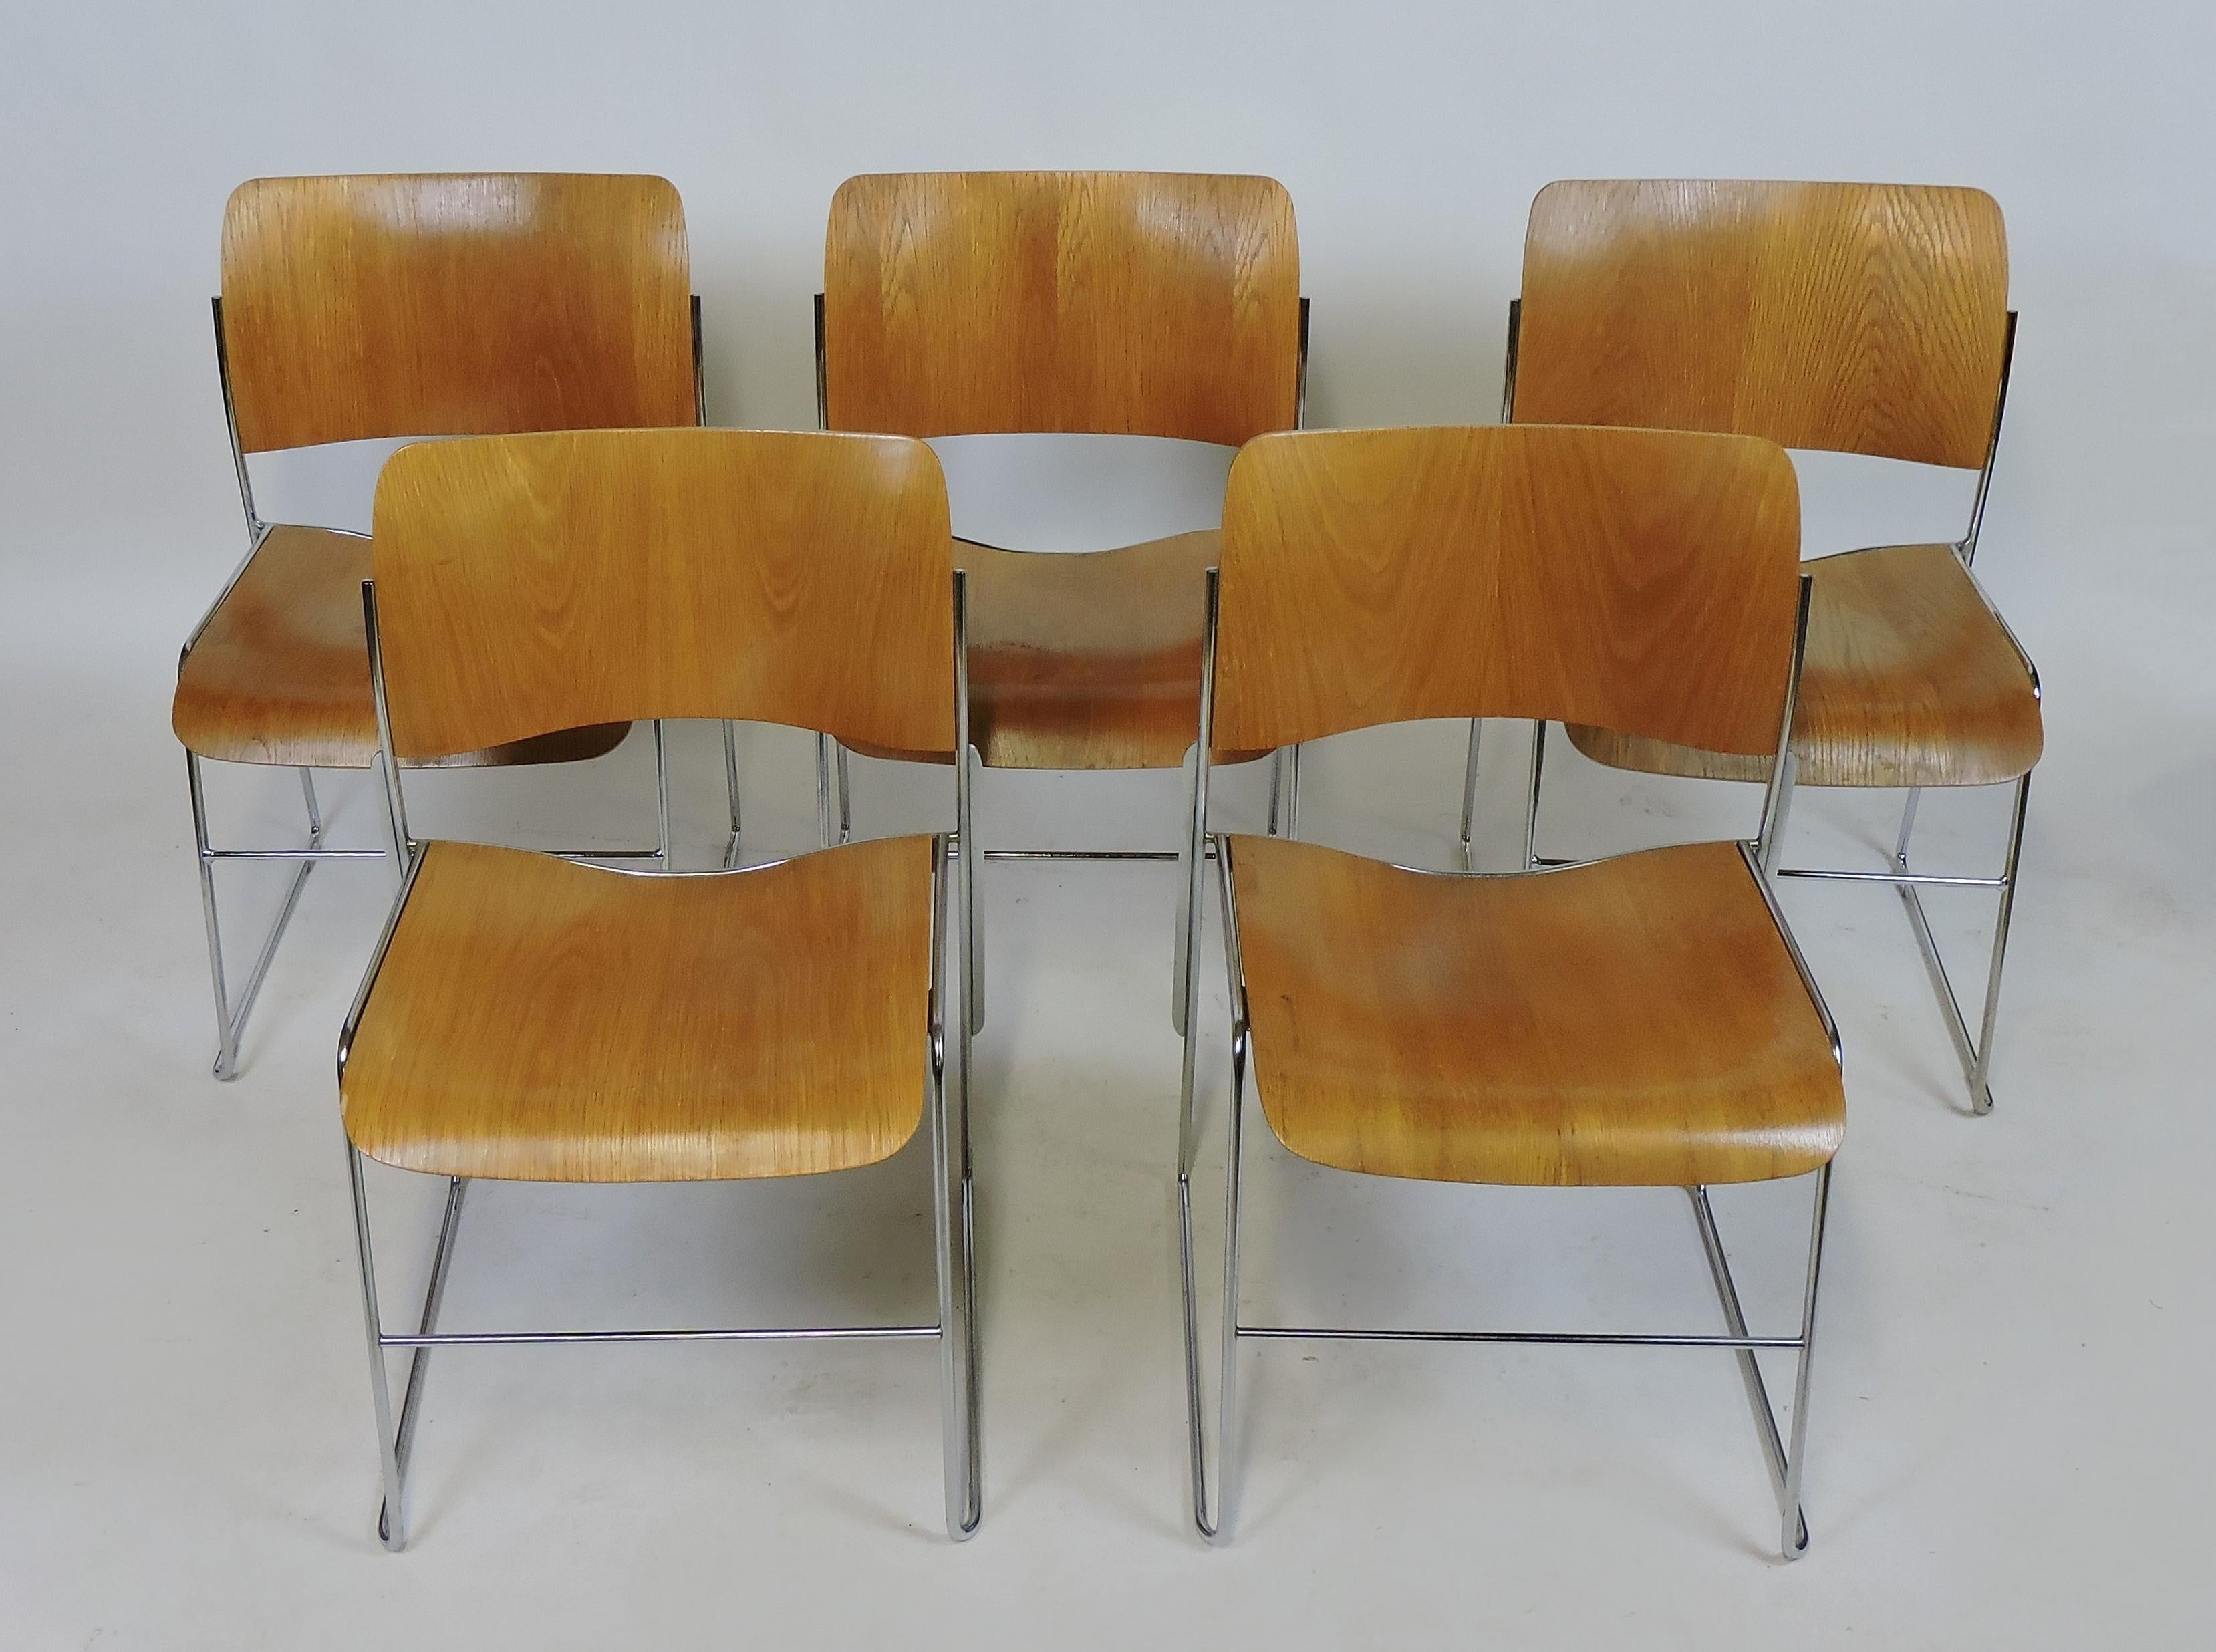 David Rowland 40/4 stacking chair in blonde ash bentwood with a steel frame. Forty chairs can be stacked in four feet and they can also be linked together. Award winning design, these are elegant and durable.
Two of these are from 1974 and three